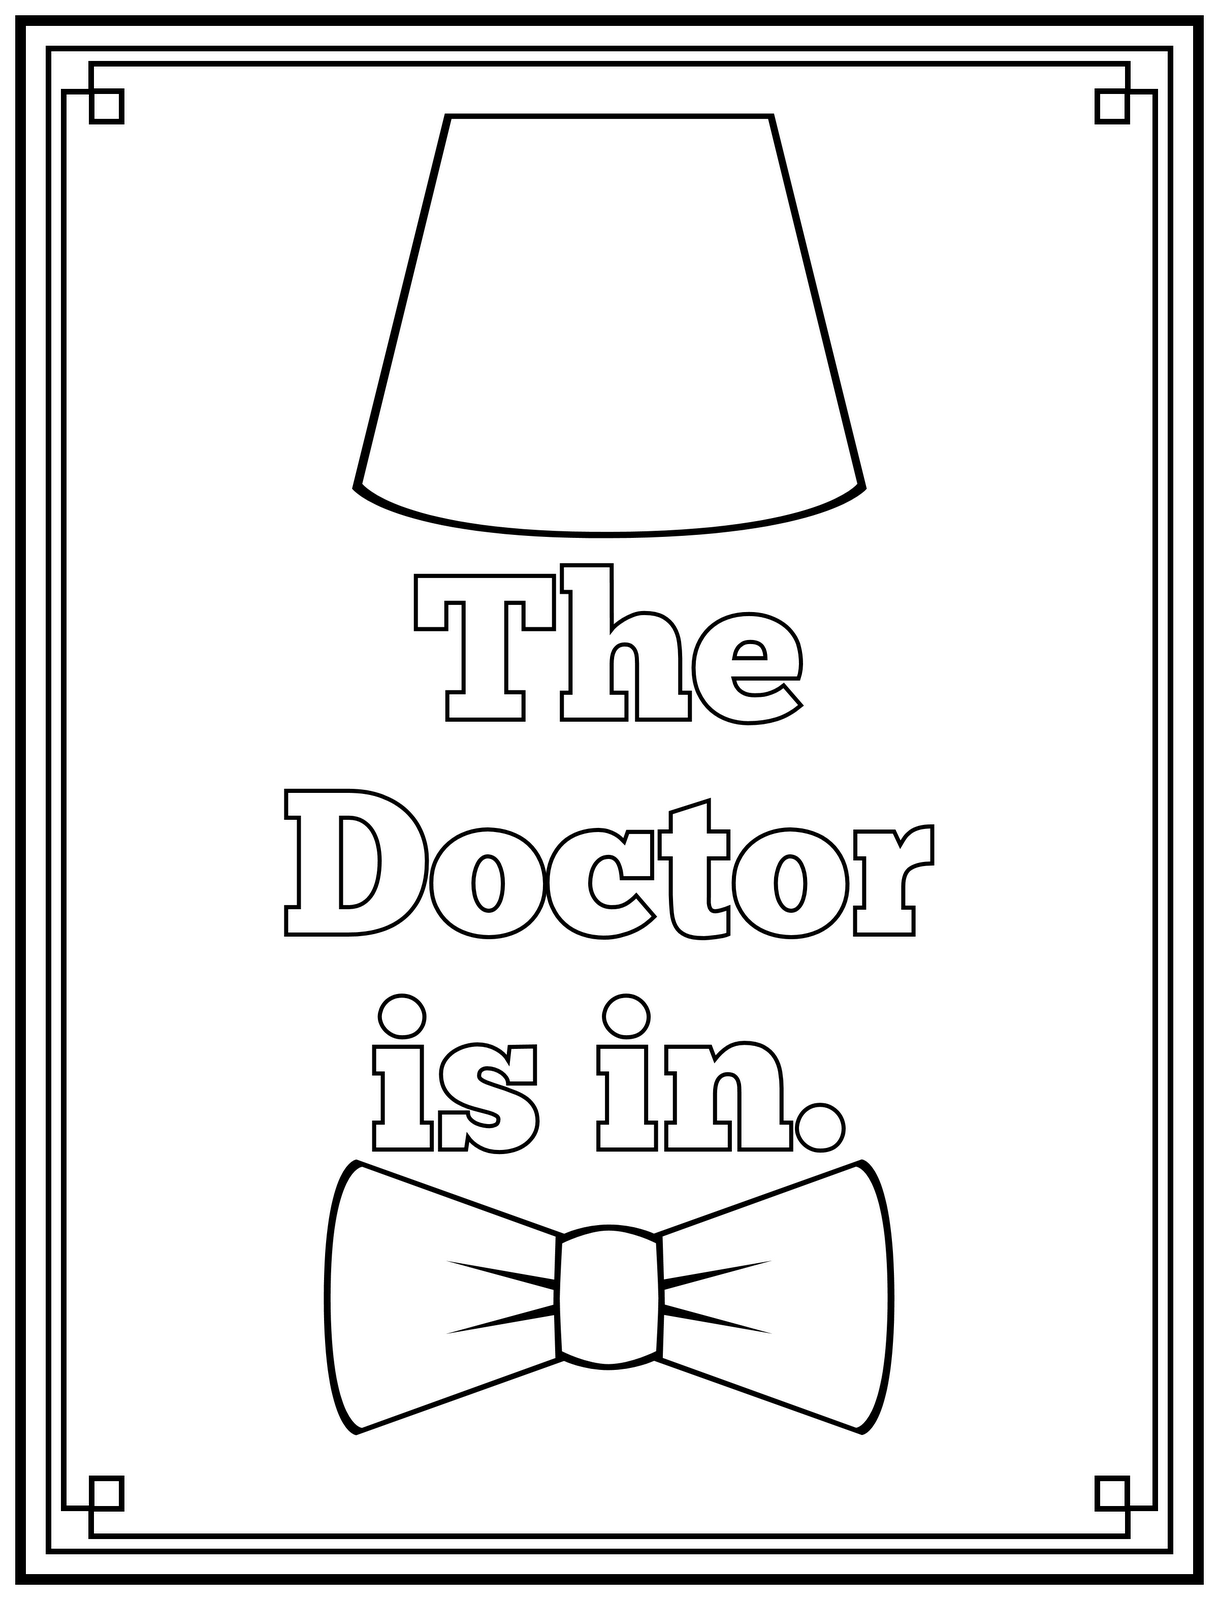 13Th Doctor Coloring Page - Coloring Pages For All Ages